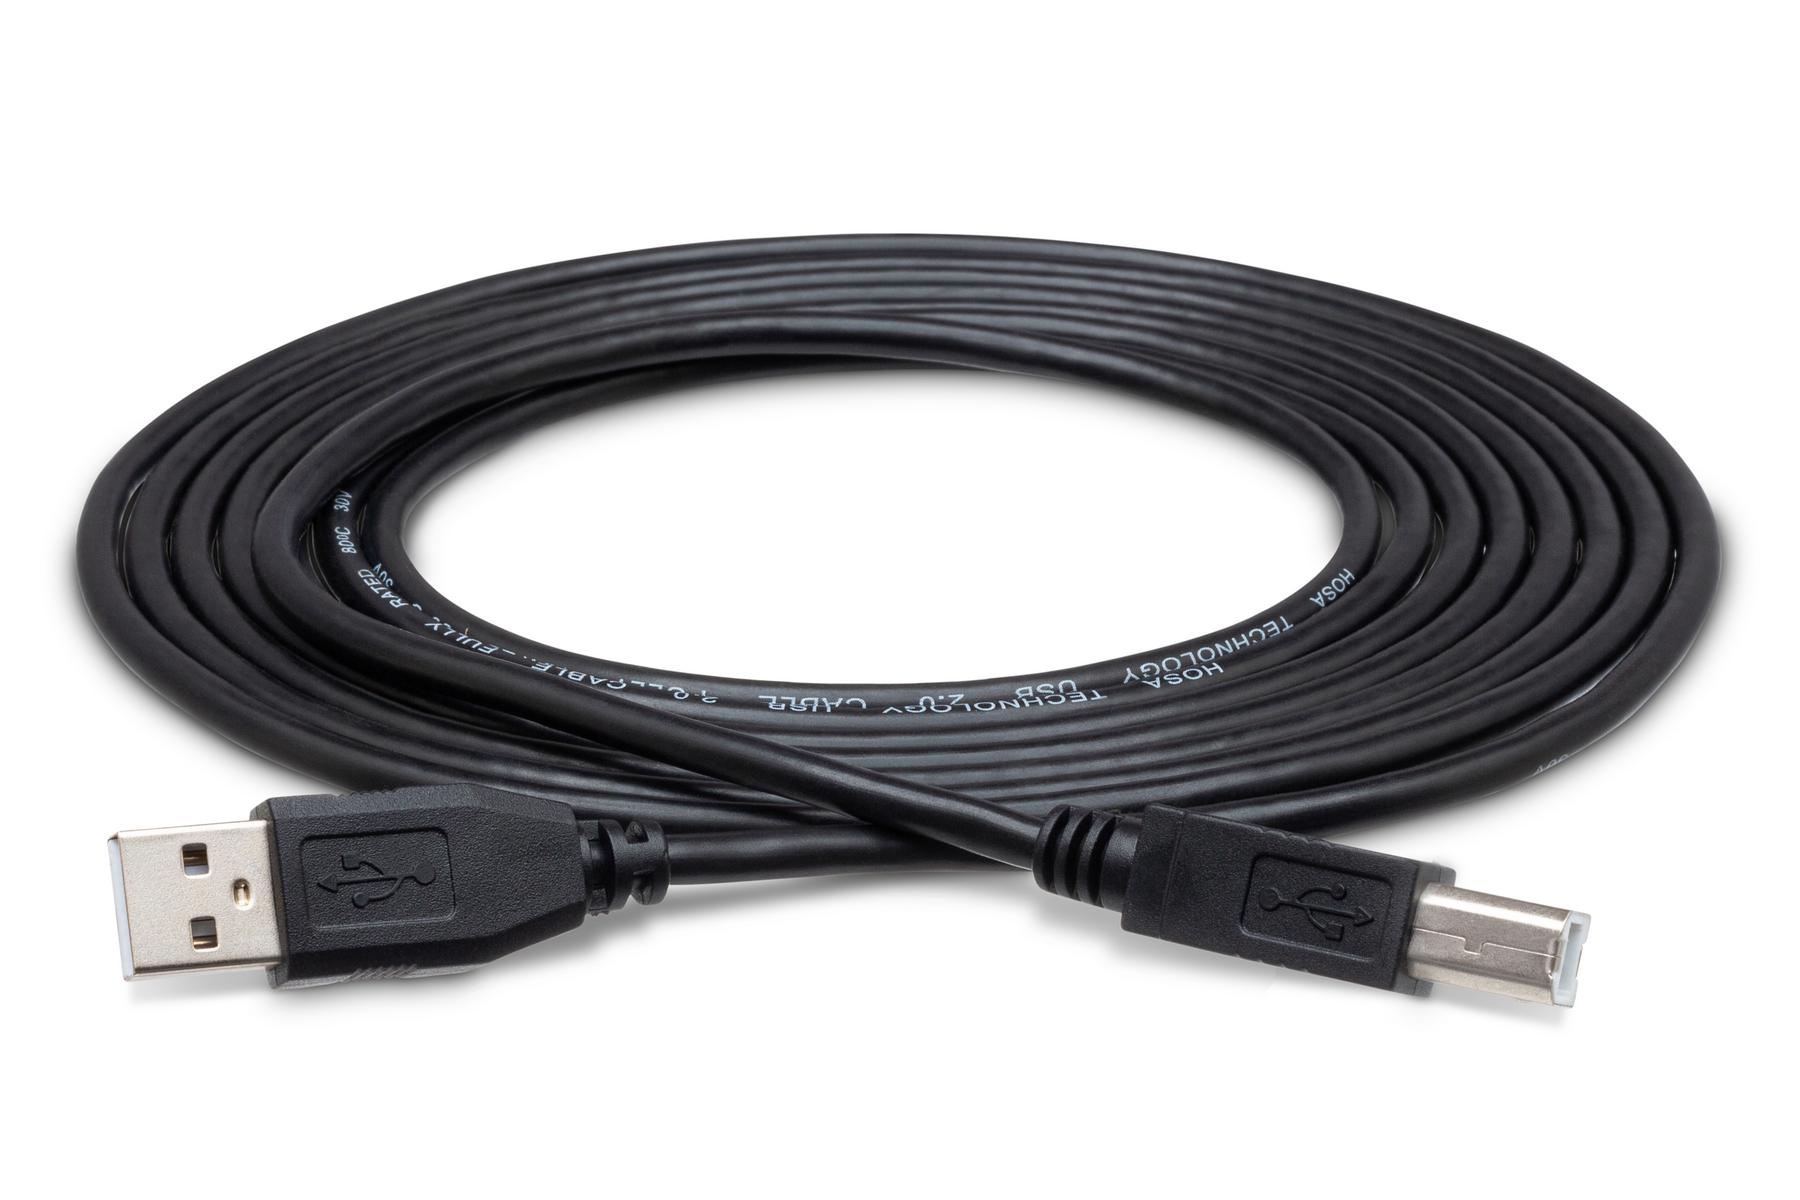 jage kapok Rettsmedicin Type A to Type B - High Speed USB Cable - Data Cables | Hosa Cables